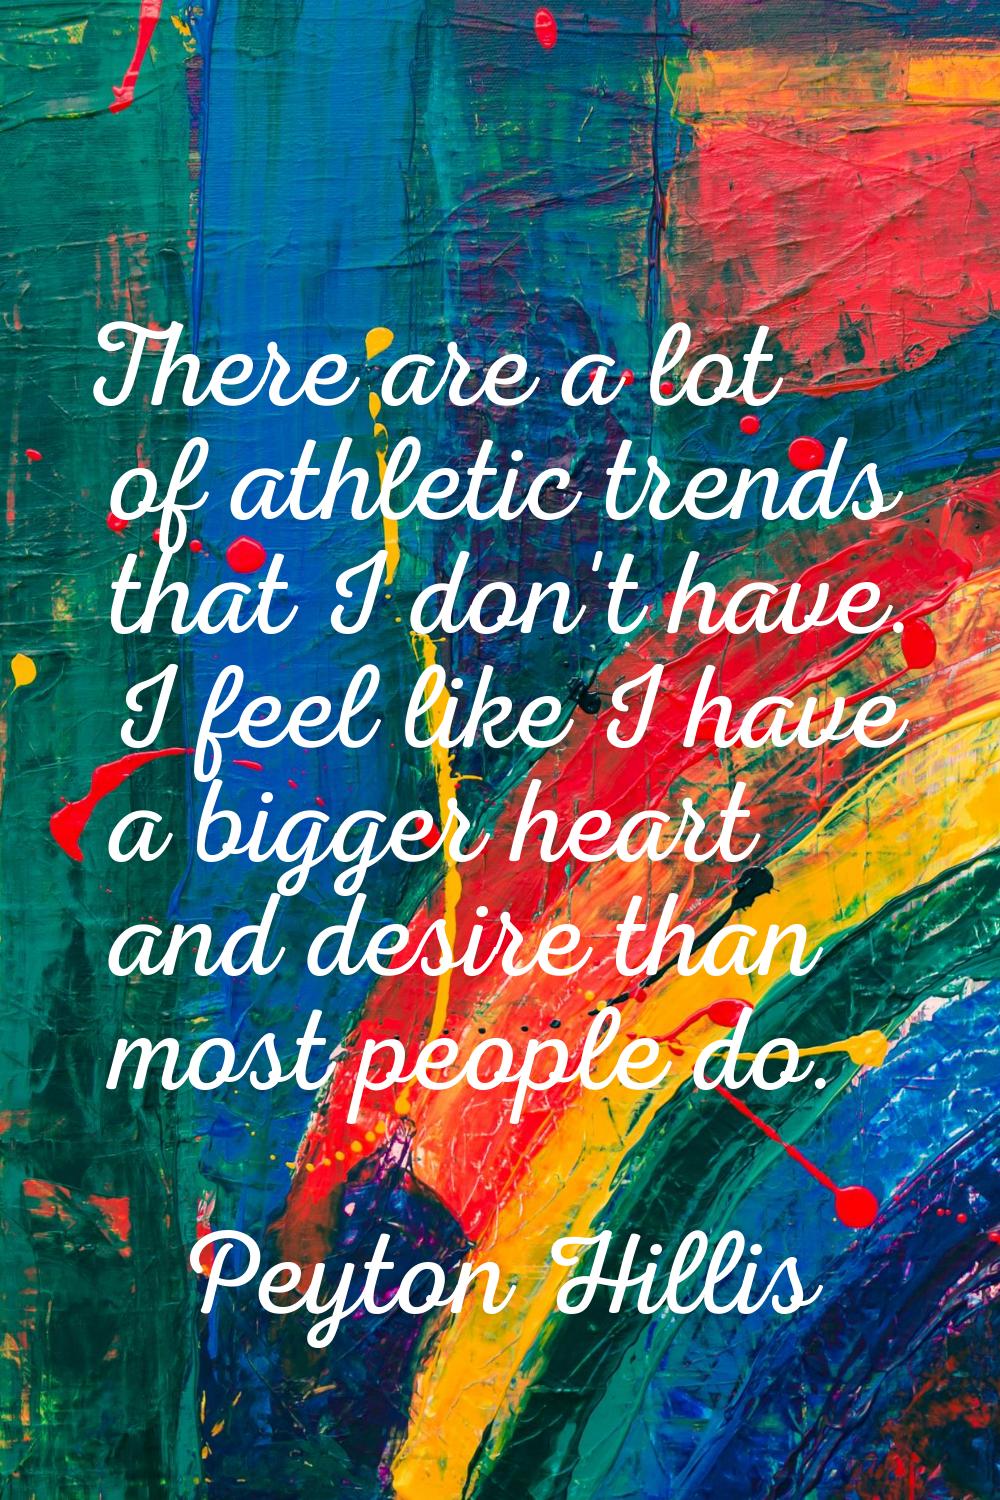 There are a lot of athletic trends that I don't have. I feel like I have a bigger heart and desire 